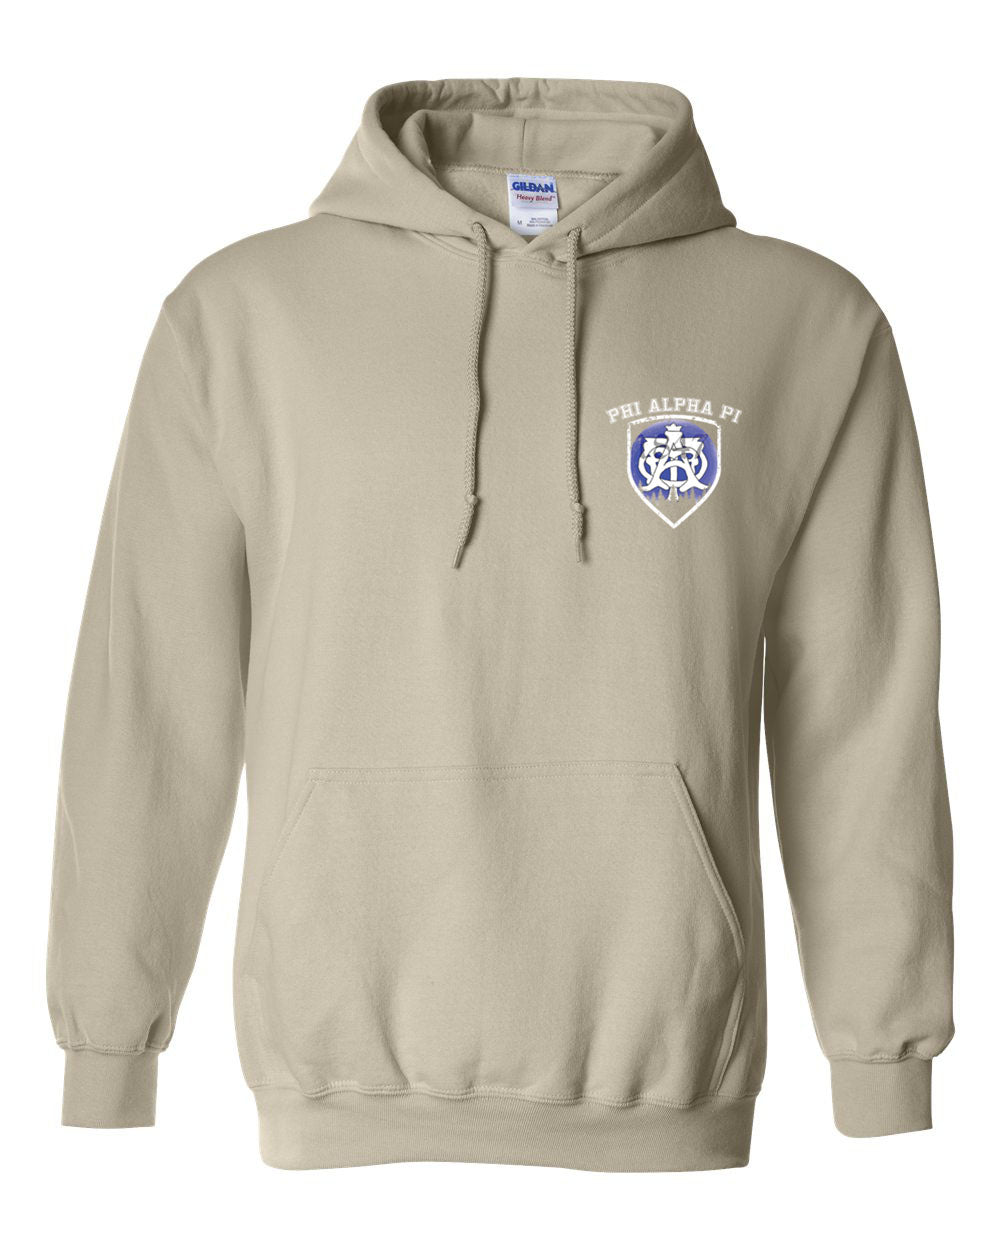 a beige hoodie with a blue and white logo on it